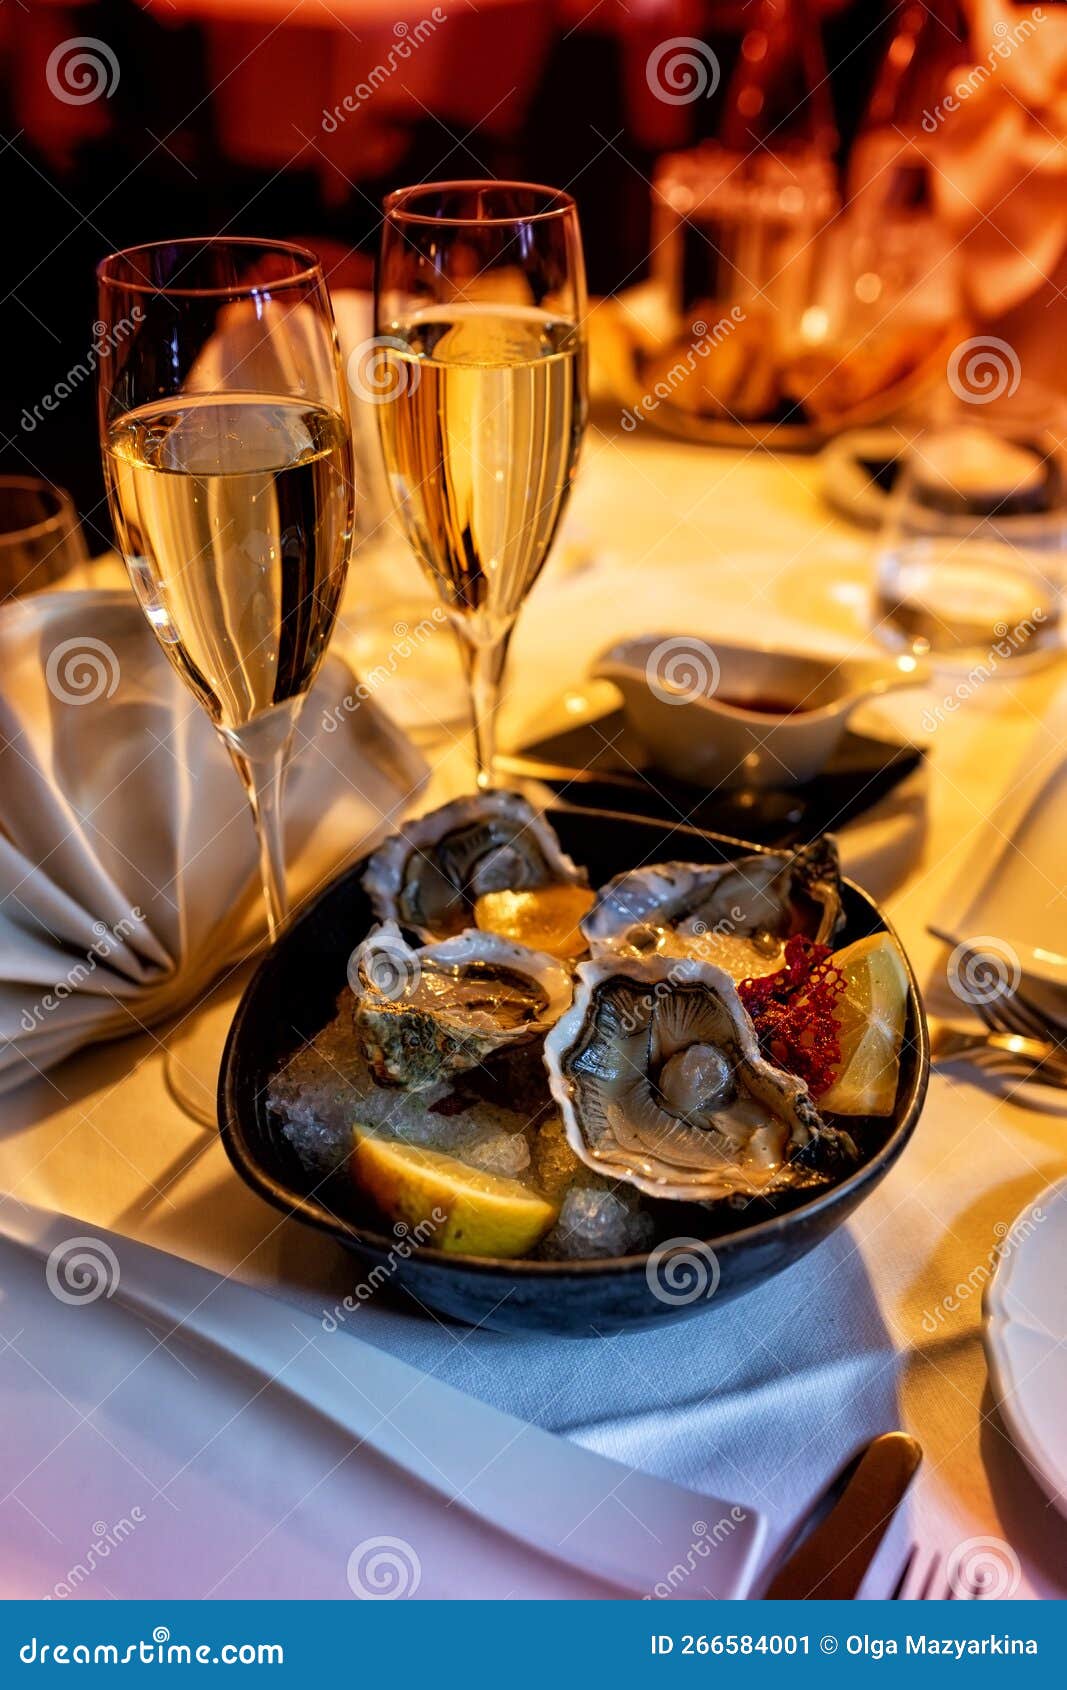 oysters and wine. romantic dinner table for two, restaurante.